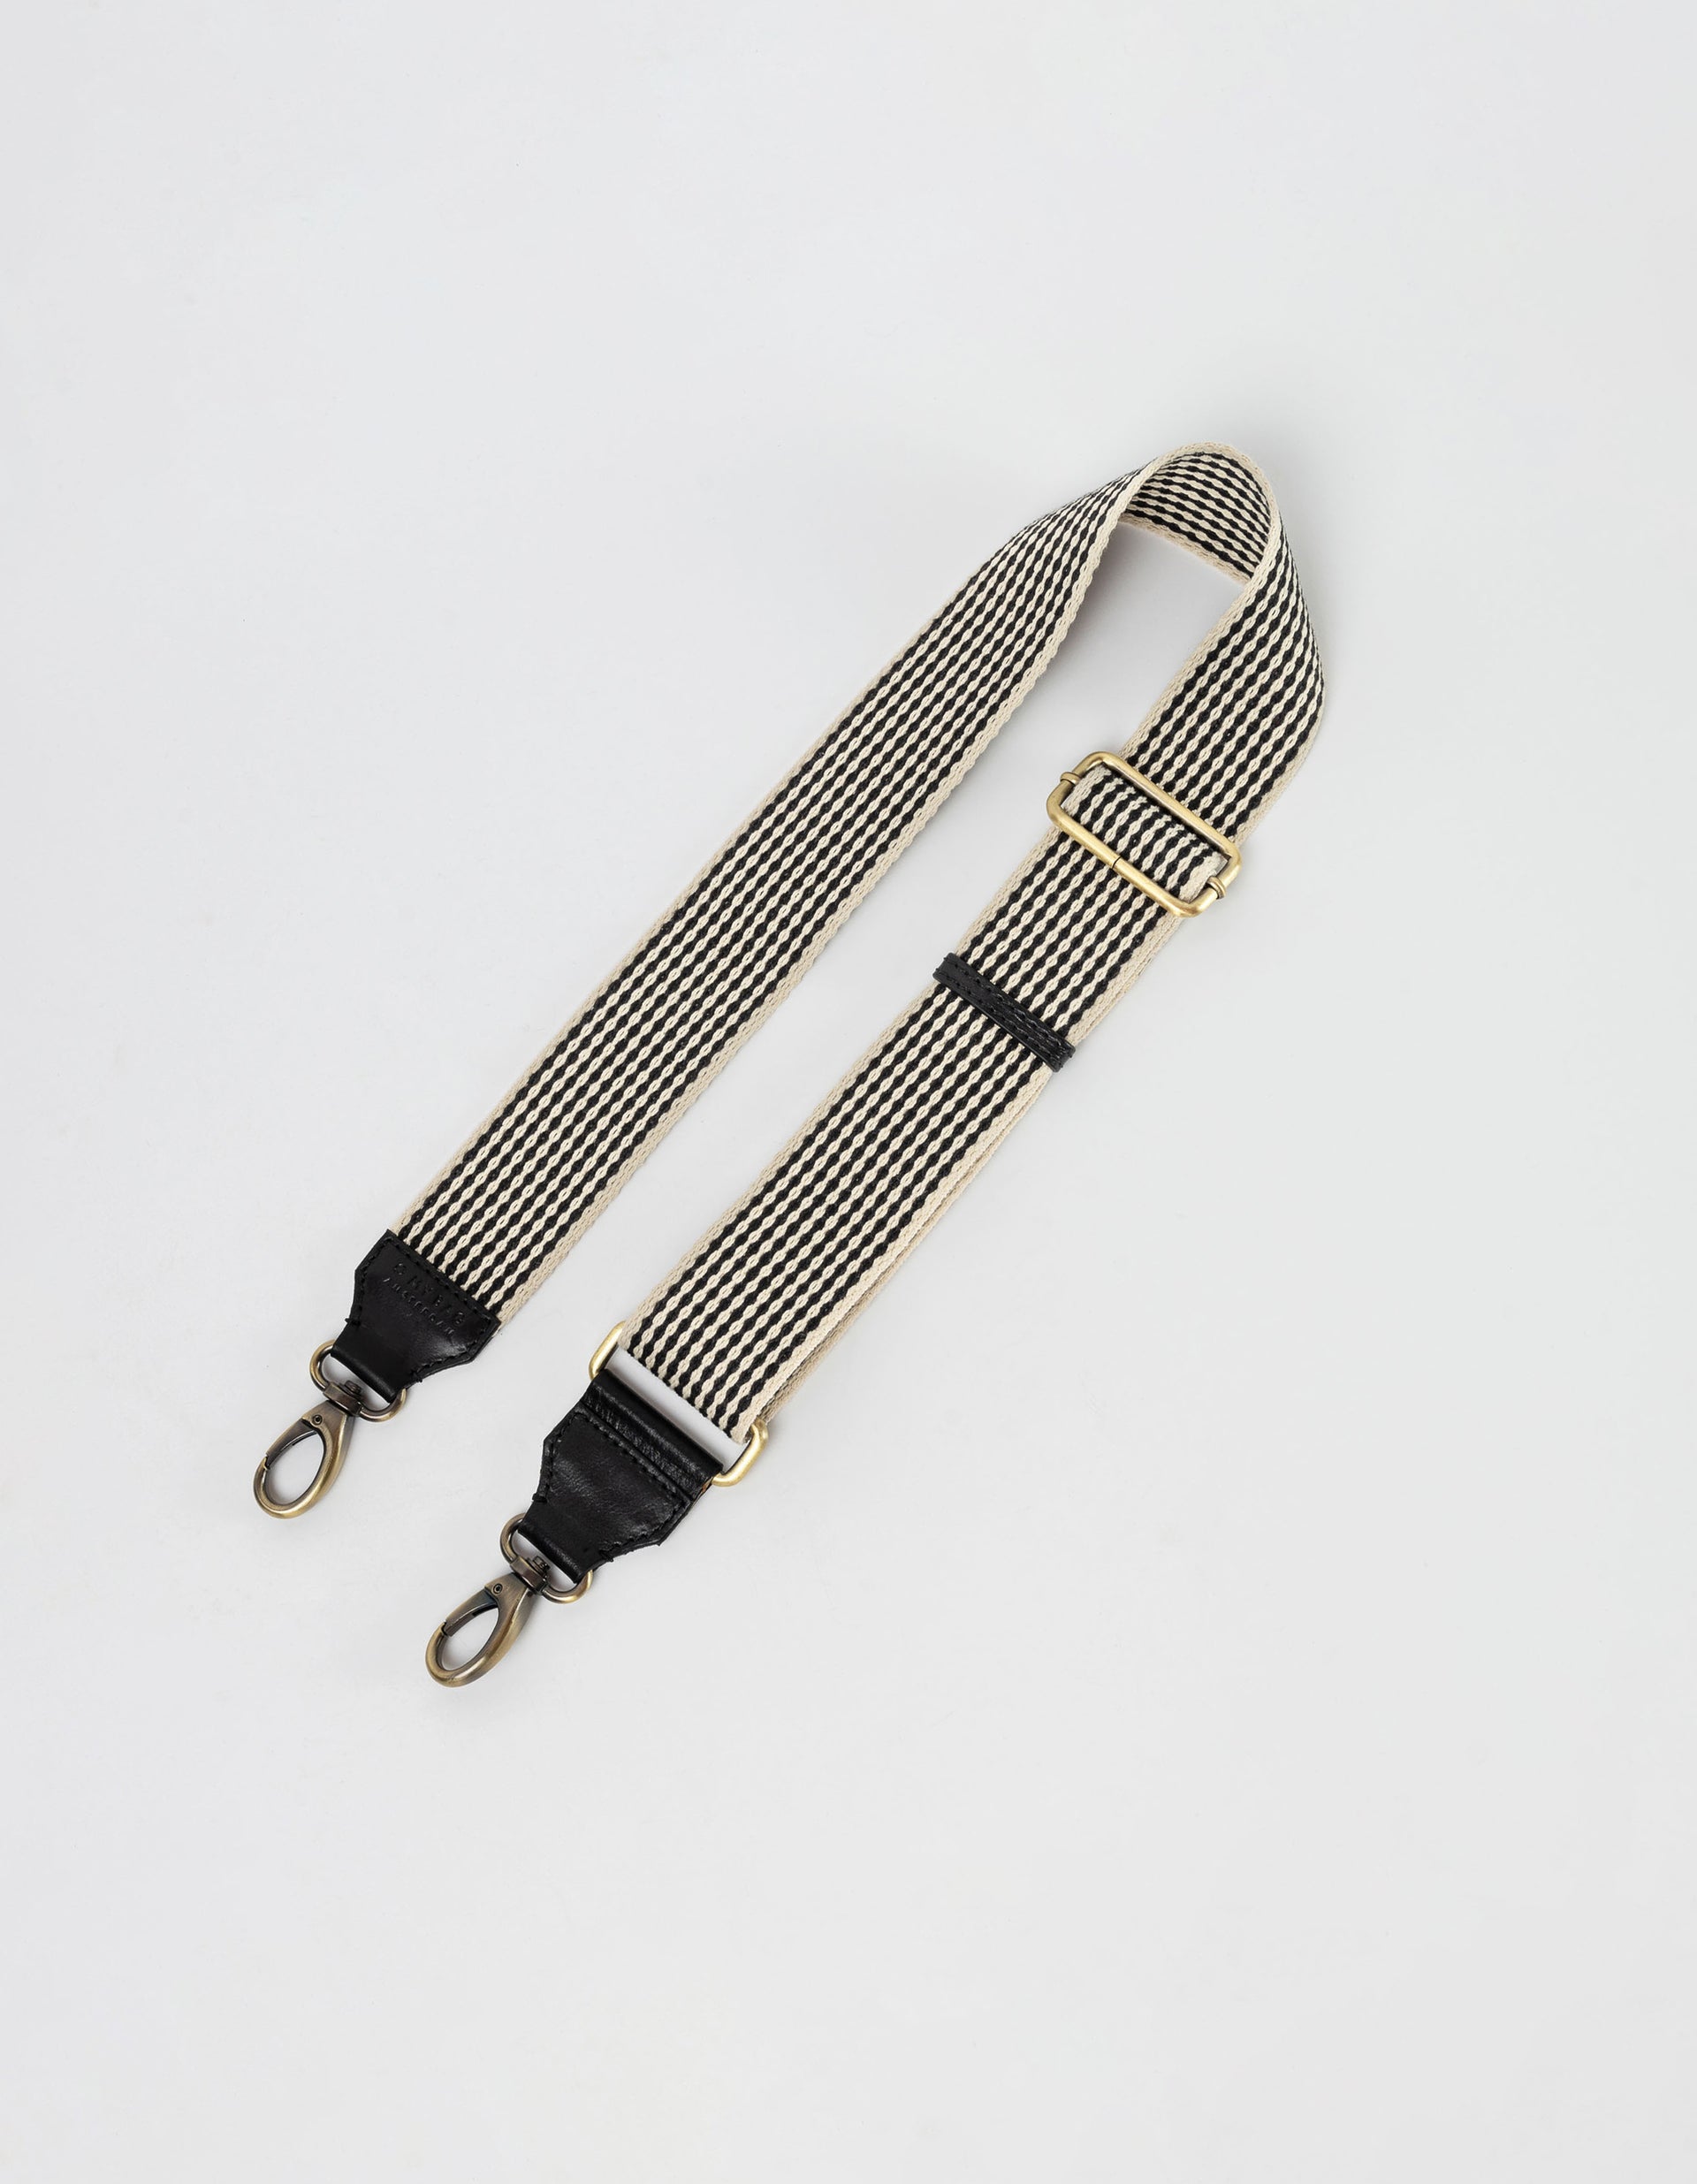 Bum Bag Checkered Webbing Strap. Second product image.